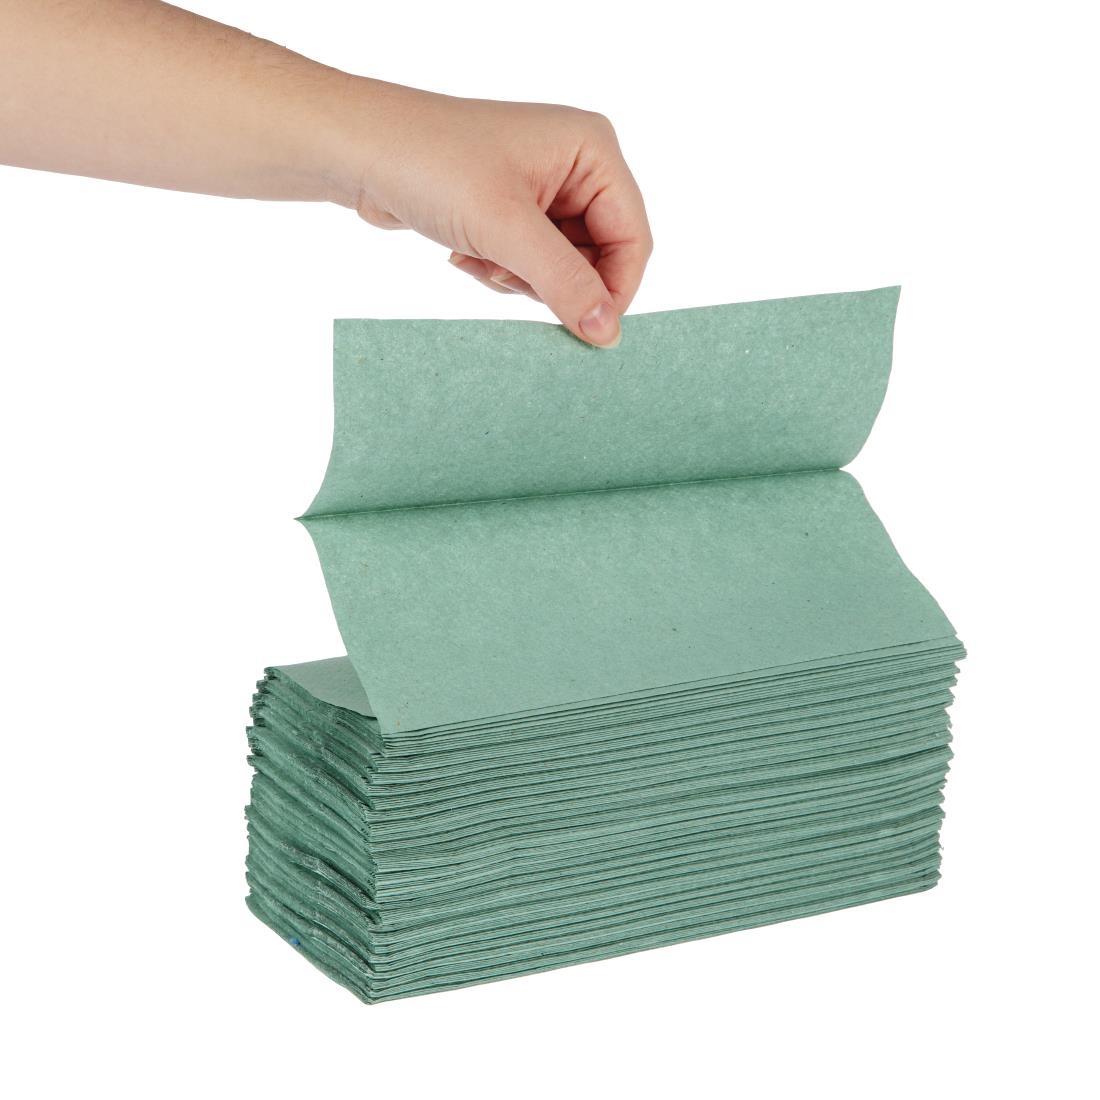 Jantex Z Fold Paper Hand Towels Green 1-Ply 250 Sheets (Pack of 12) - DL923  - 4